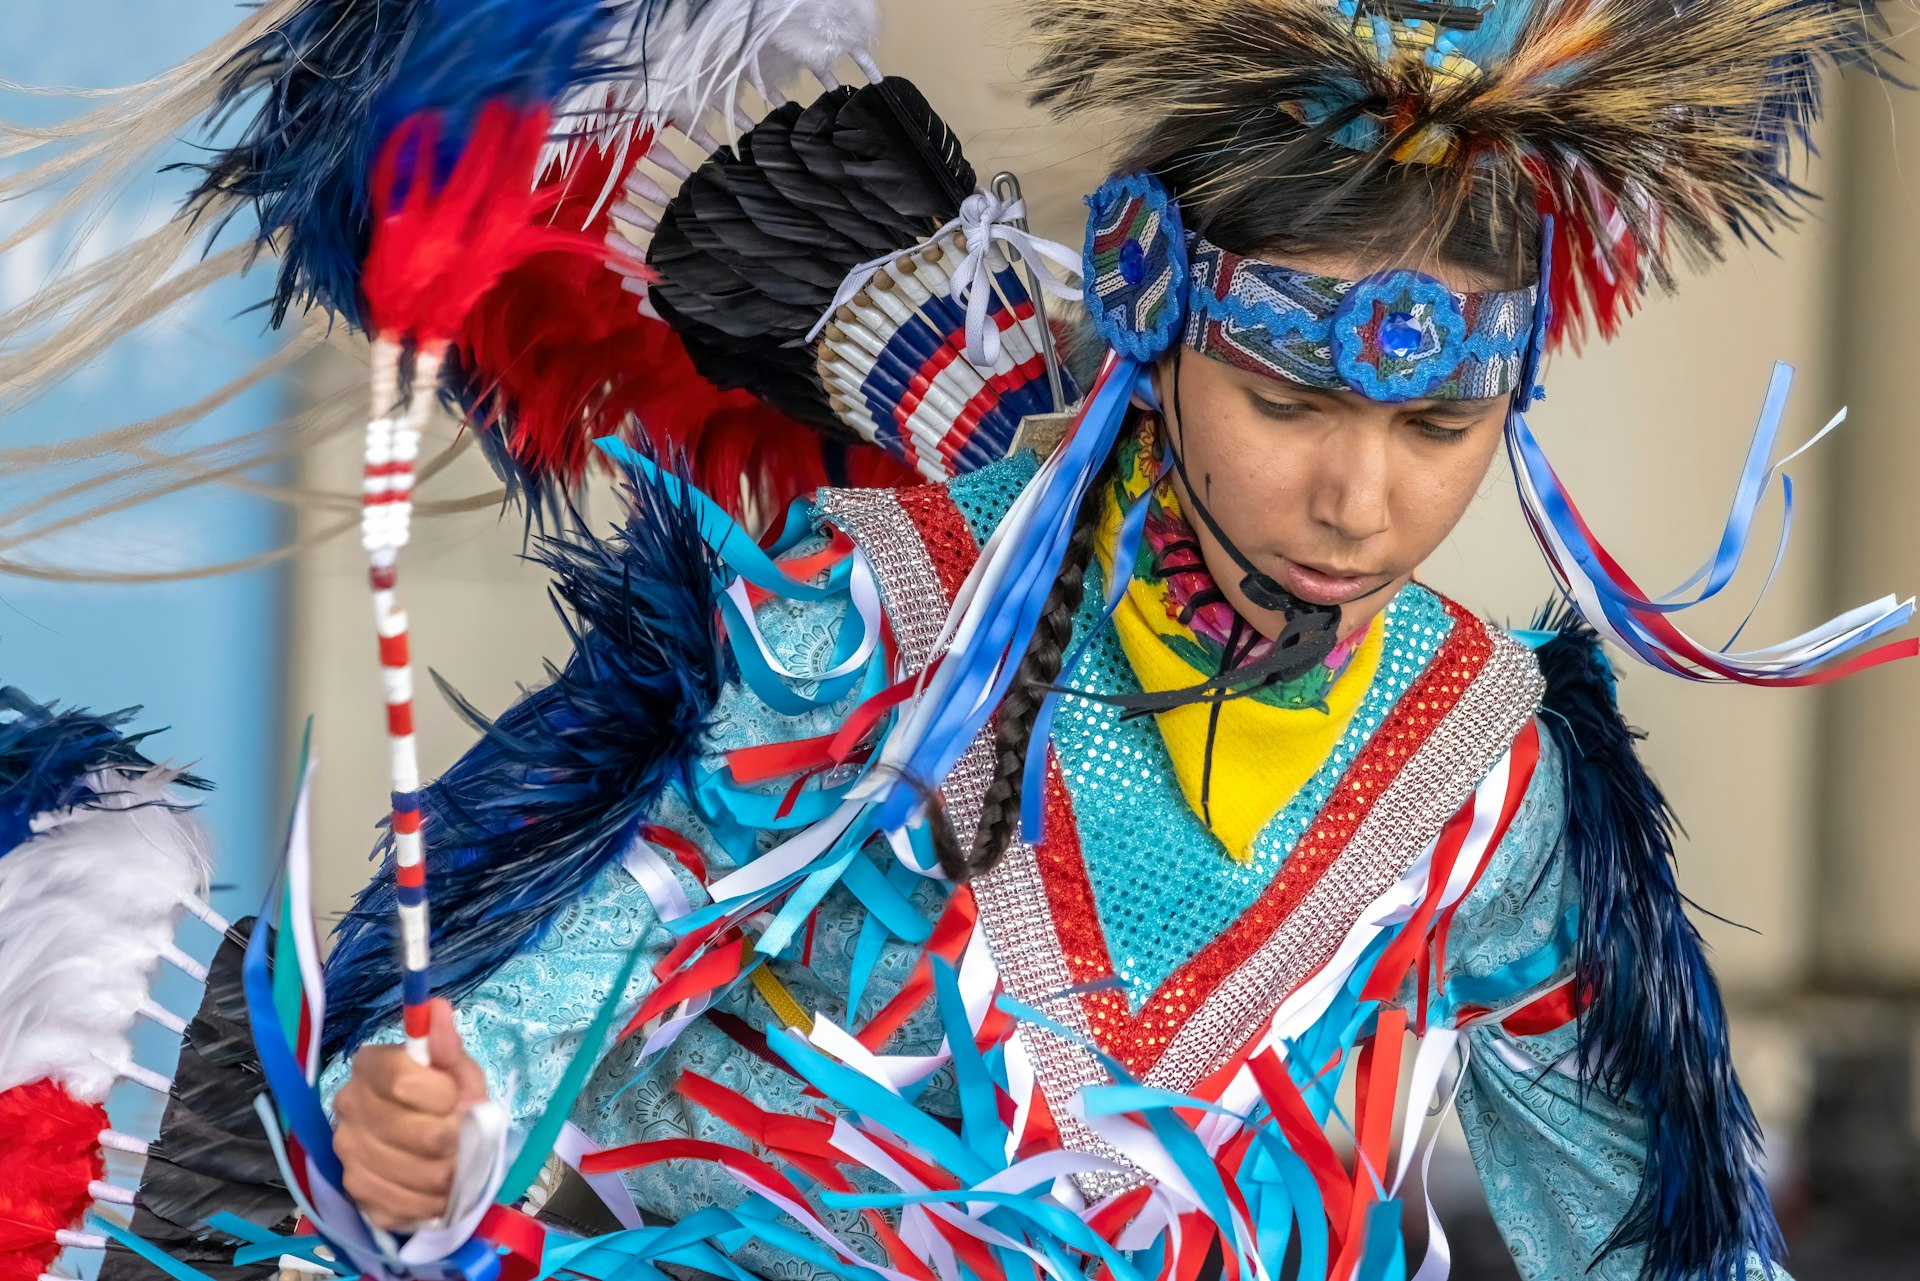 A young Indigenous boy in vivid traditional dress, Alberta, Canada